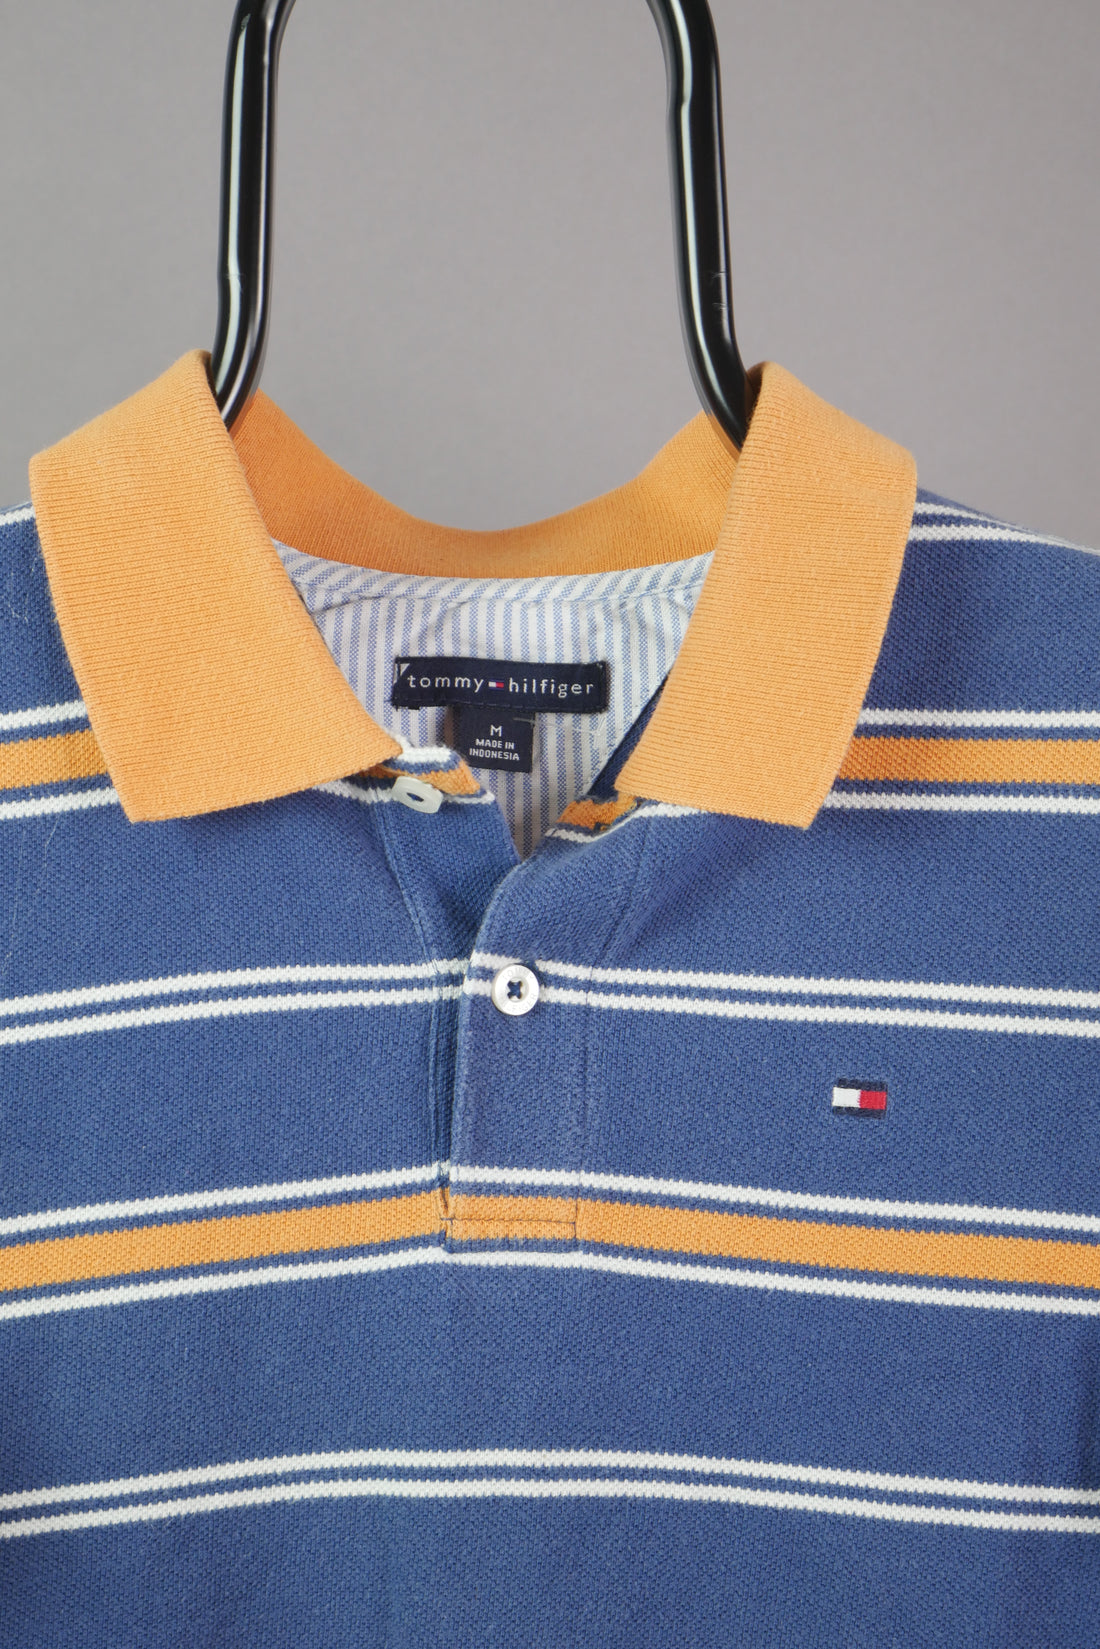 The Tommy Hilfiger Striped Polo (M)